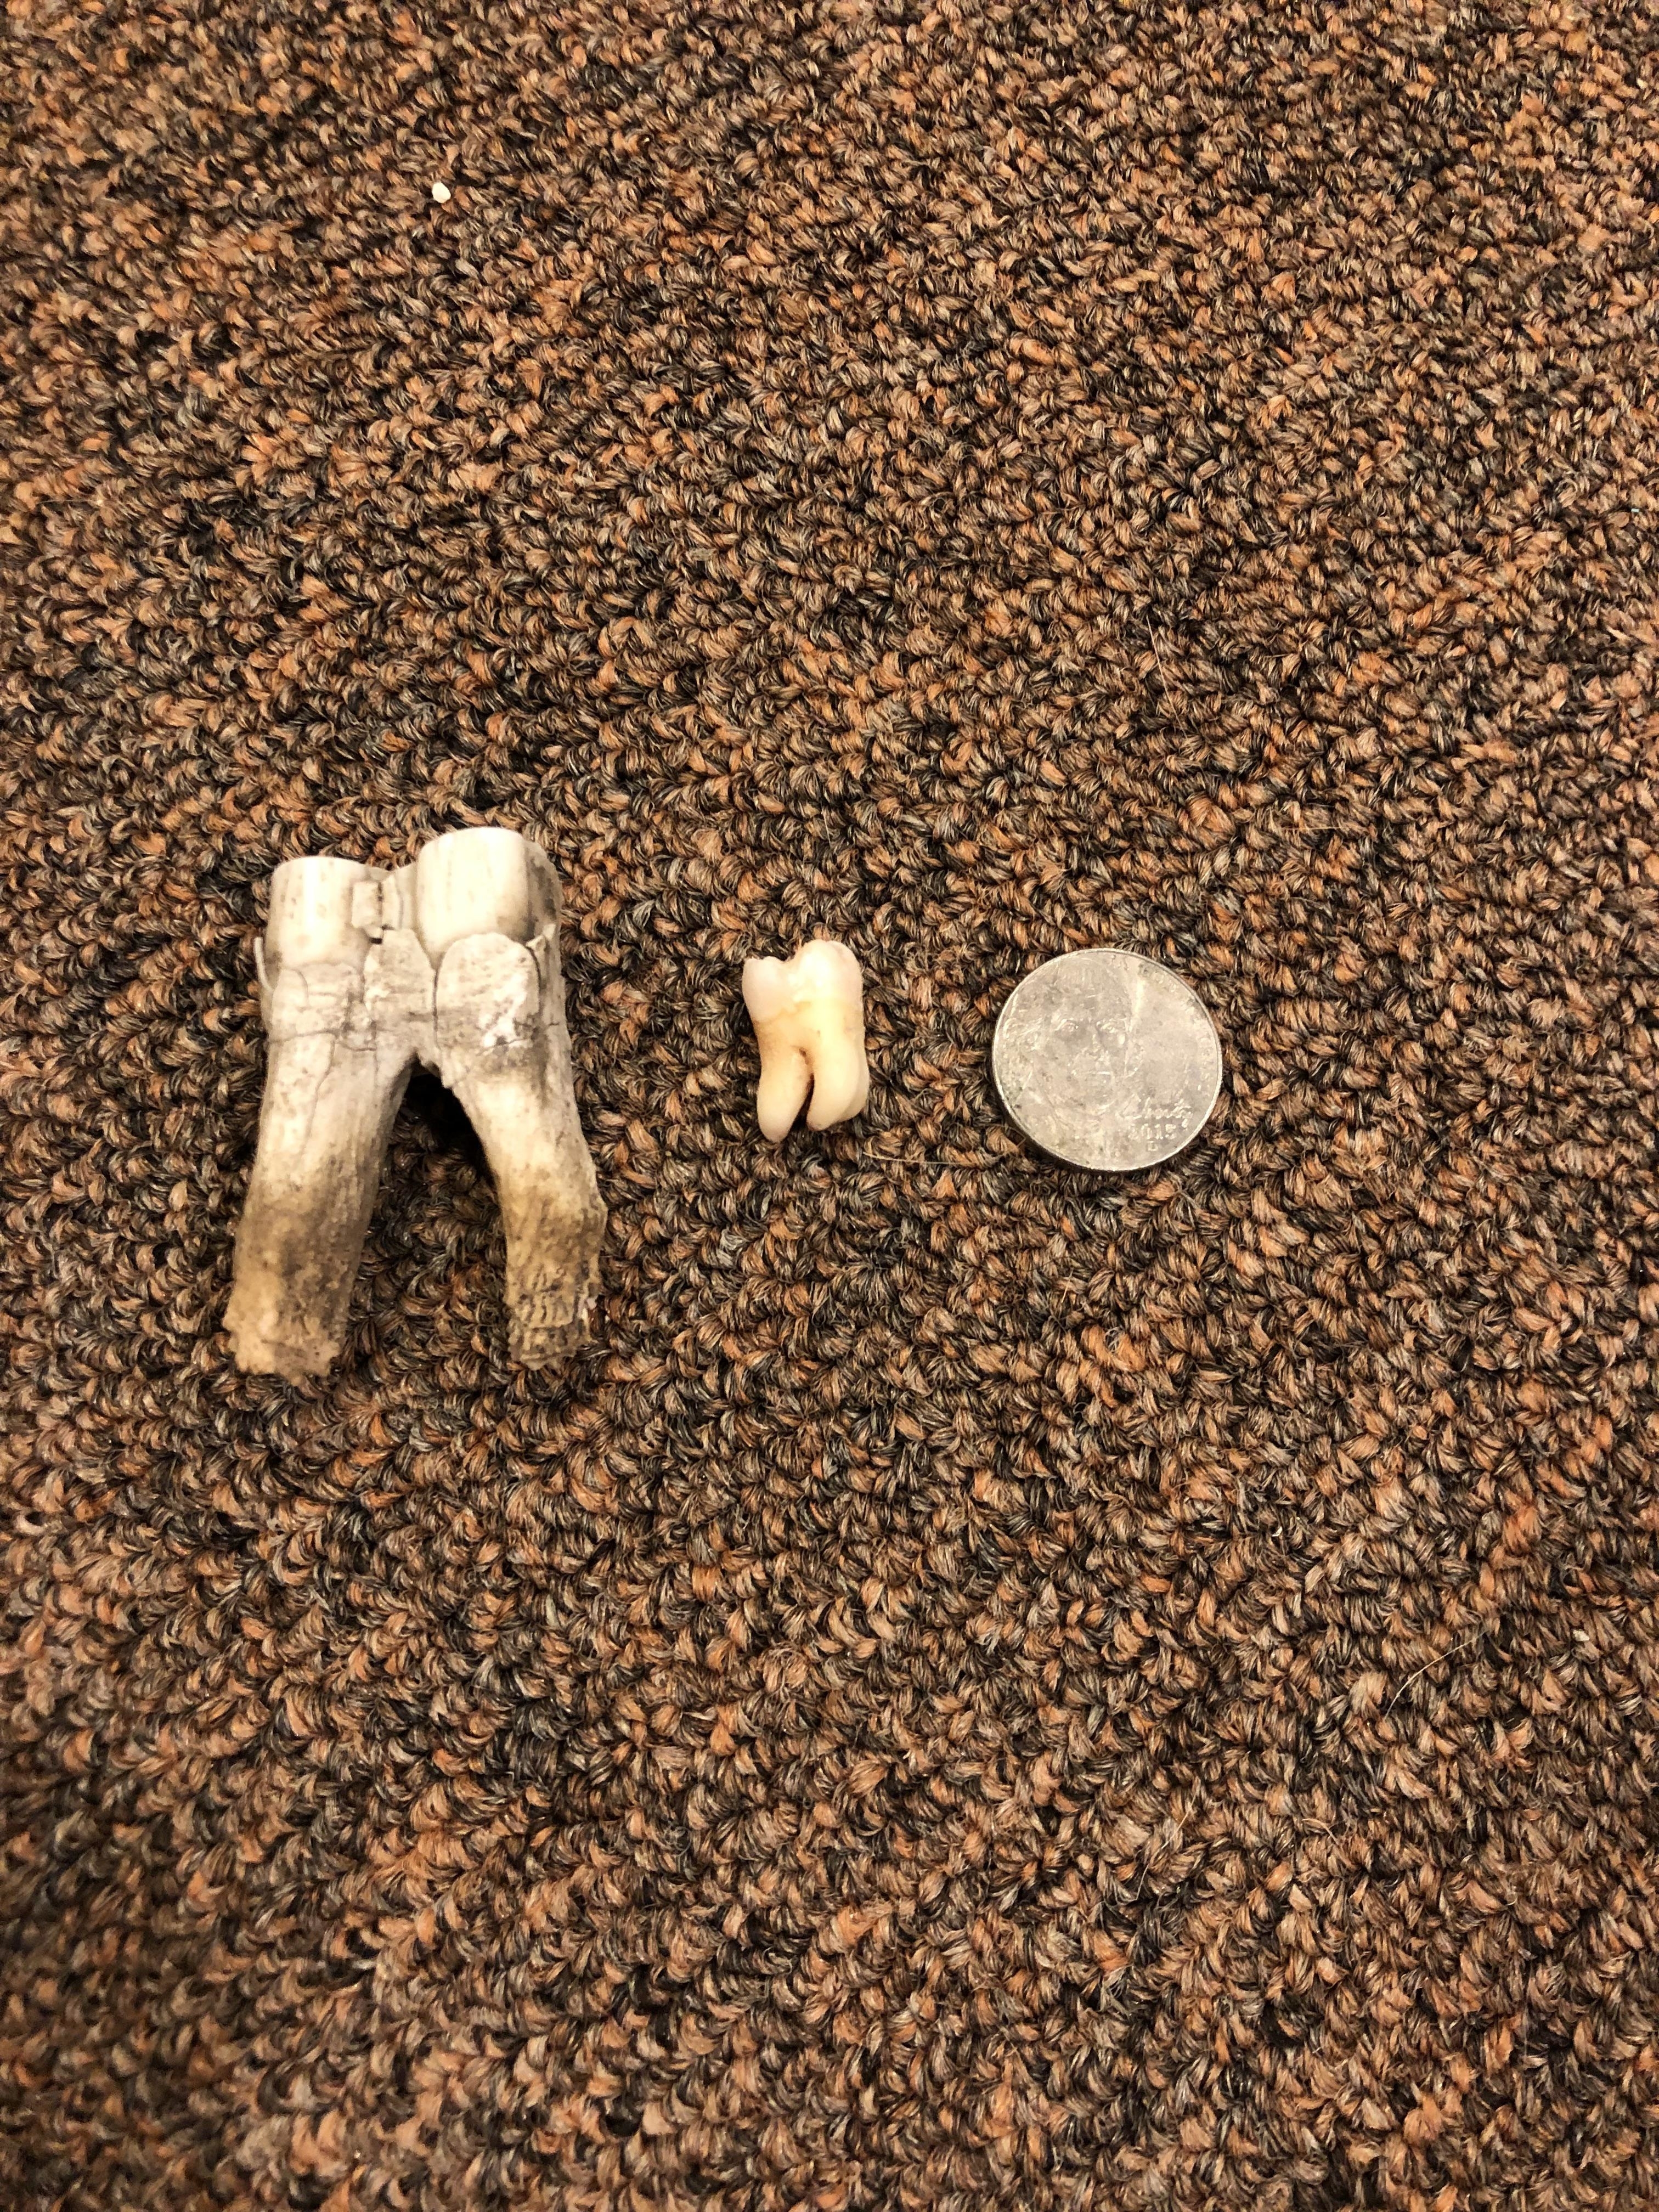 Comparison of a cow tooth vs. a human tooth